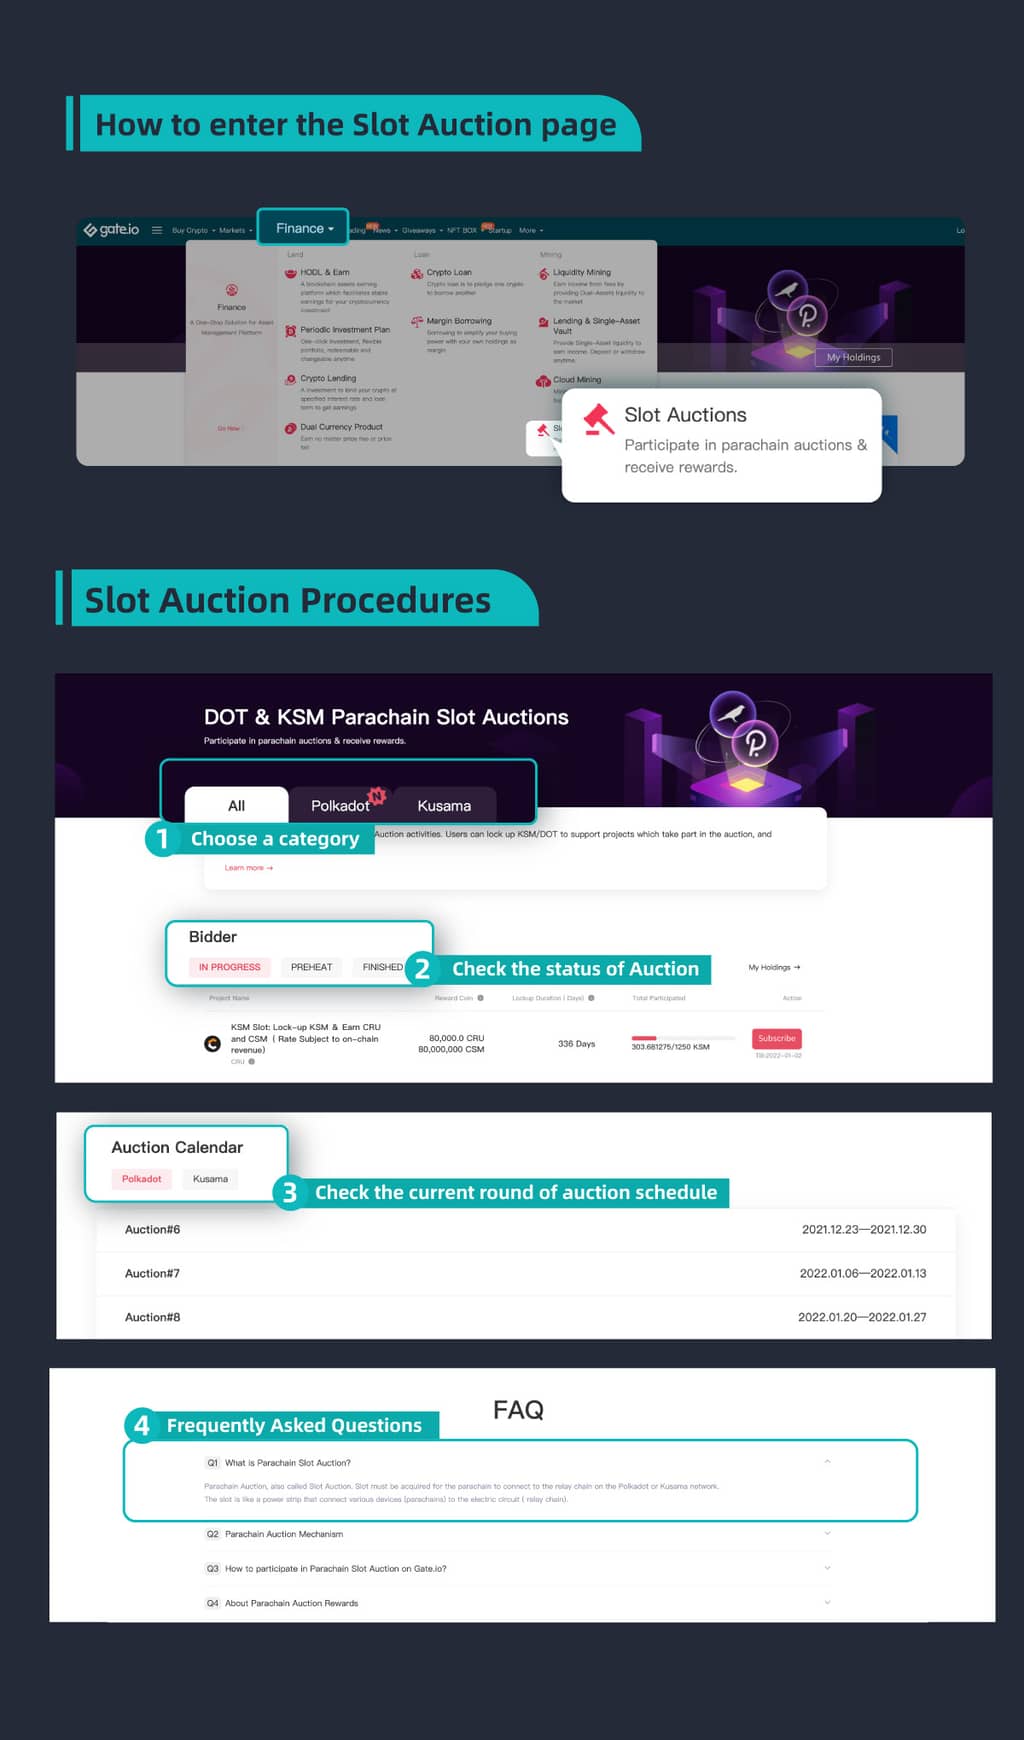 Gate.io Join the KSM & DOT Slot Auction with One-Click on Gate.io